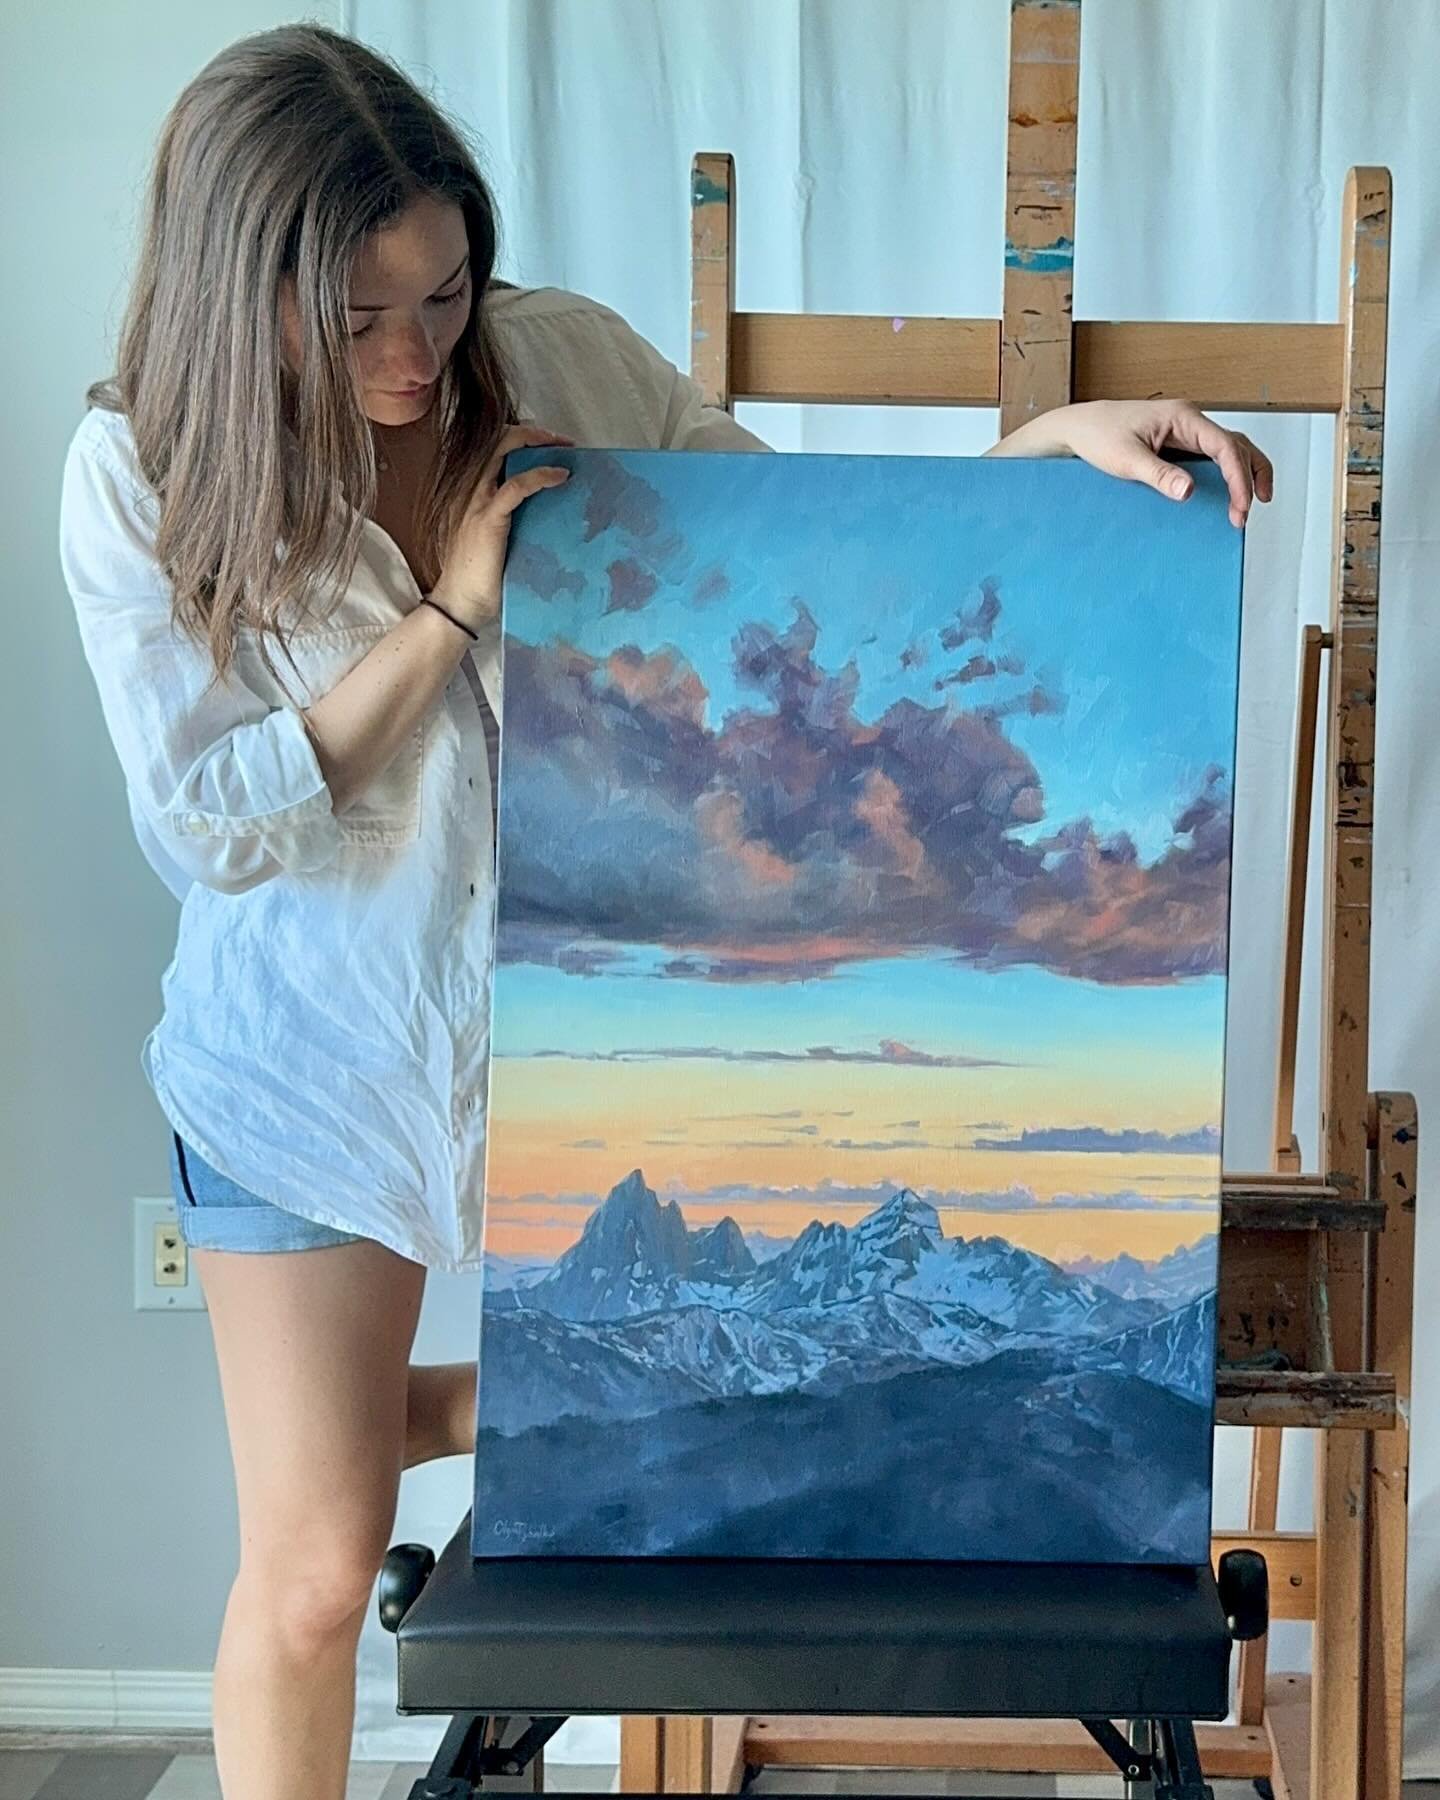 🌅 Here&rsquo;s how this painting &ldquo;Echoes of the Sunset&rdquo; came to life. Check out the progress shots to see the different stages from start to finish. 

Oil on canvas, 30&rdquo;x20&rdquo;. 

#BehindTheBrush #SunsetPainting #ArtisticProcess